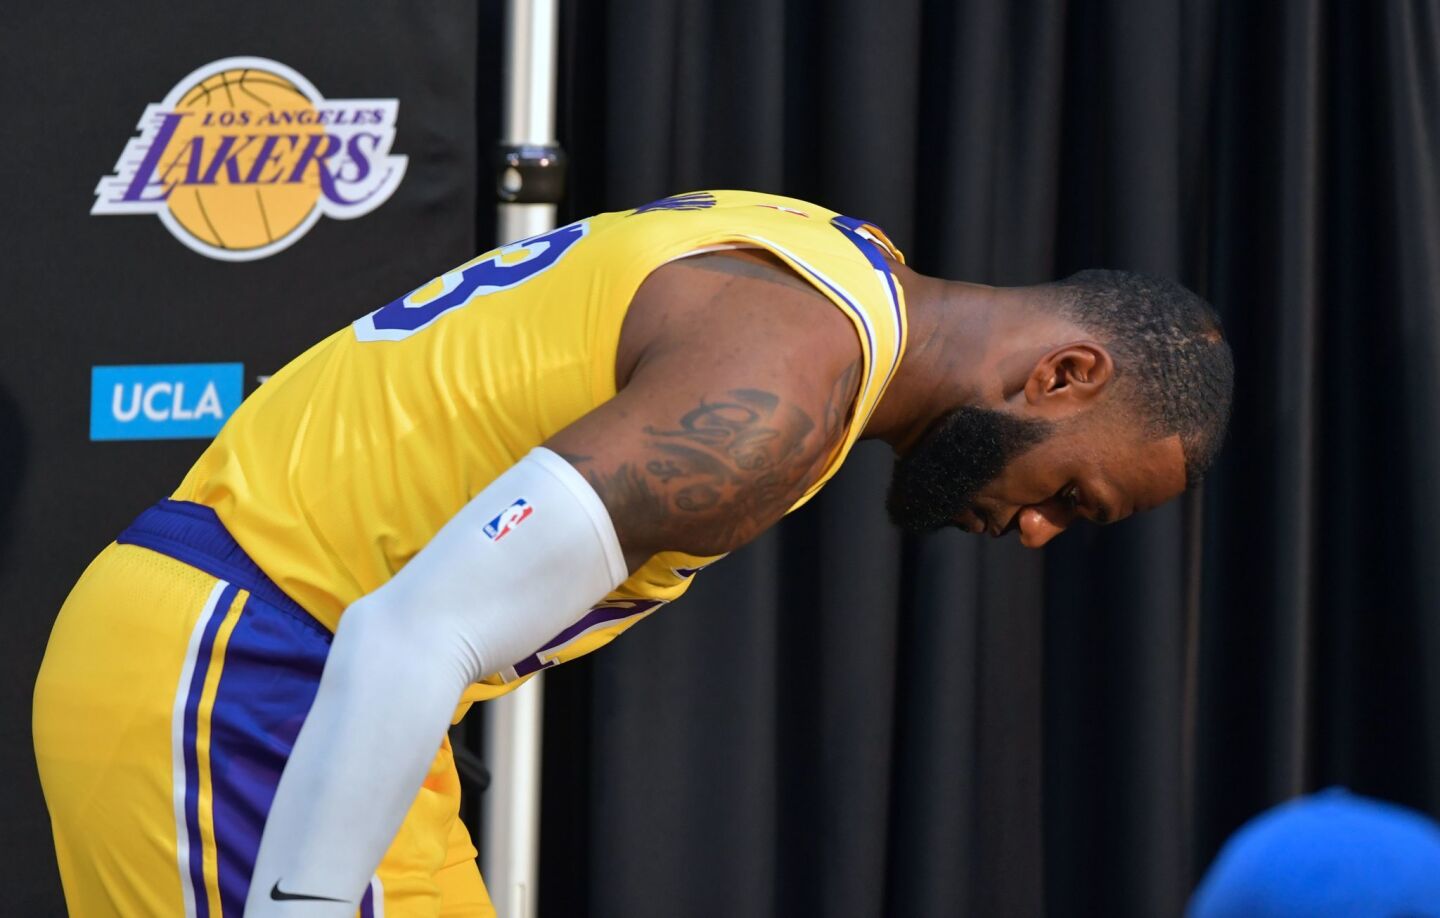 LeBron James appears to look for something while stepping out following his press conference on the team's Media Day event in Los Angeles, California, September 24, 2018. - The Lakers open their 2018 NBA season in Portland on October 18th. (Photo by Frederic J. BROWN / AFP)FREDERIC J. BROWN/AFP/Getty Images ** OUTS - ELSENT, FPG, CM - OUTS * NM, PH, VA if sourced by CT, LA or MoD **